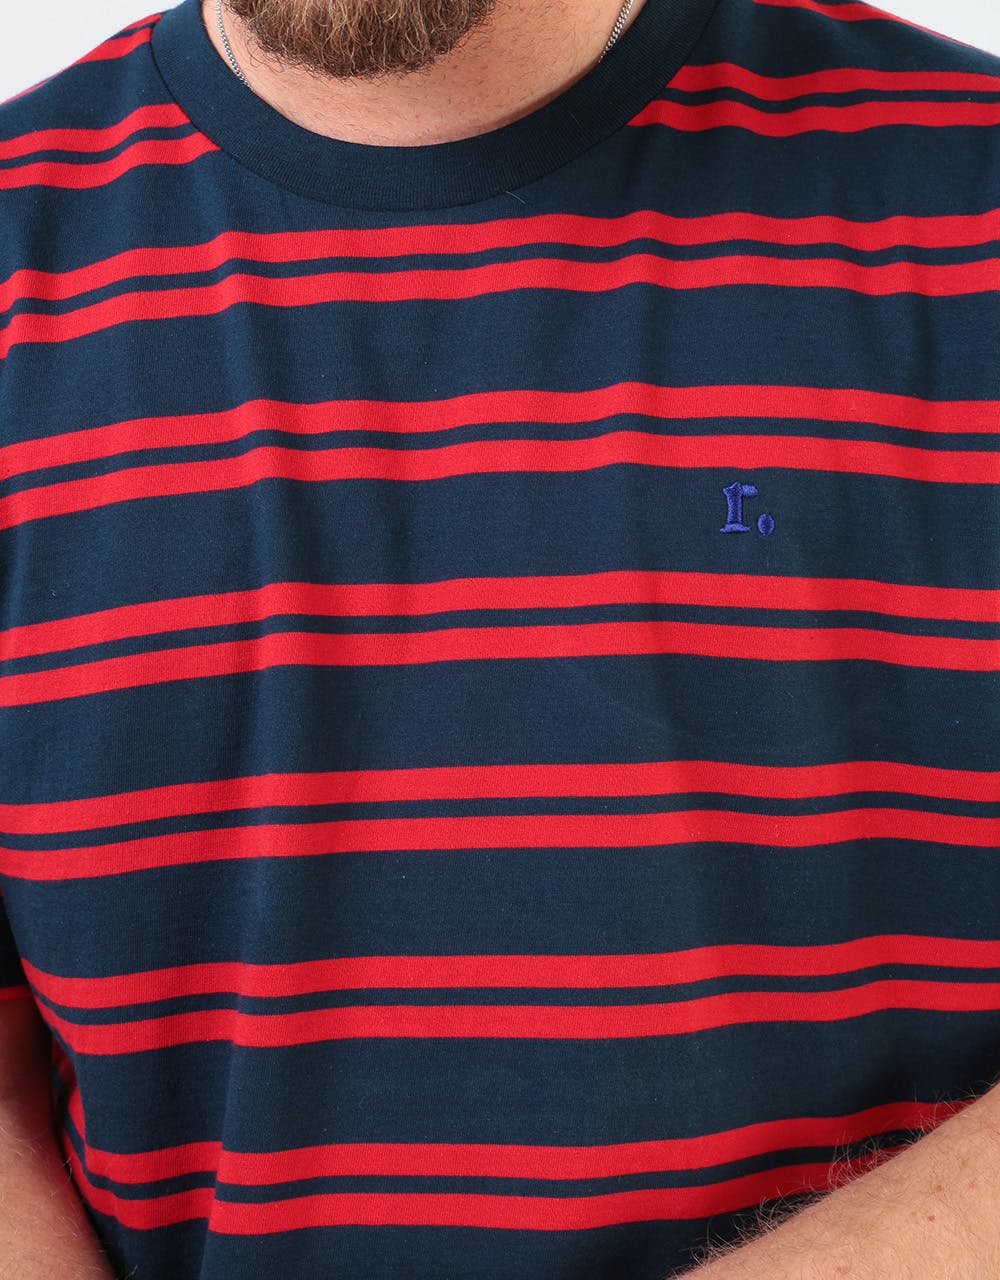 Route One Classic Stripe T-Shirt - Navy/Red